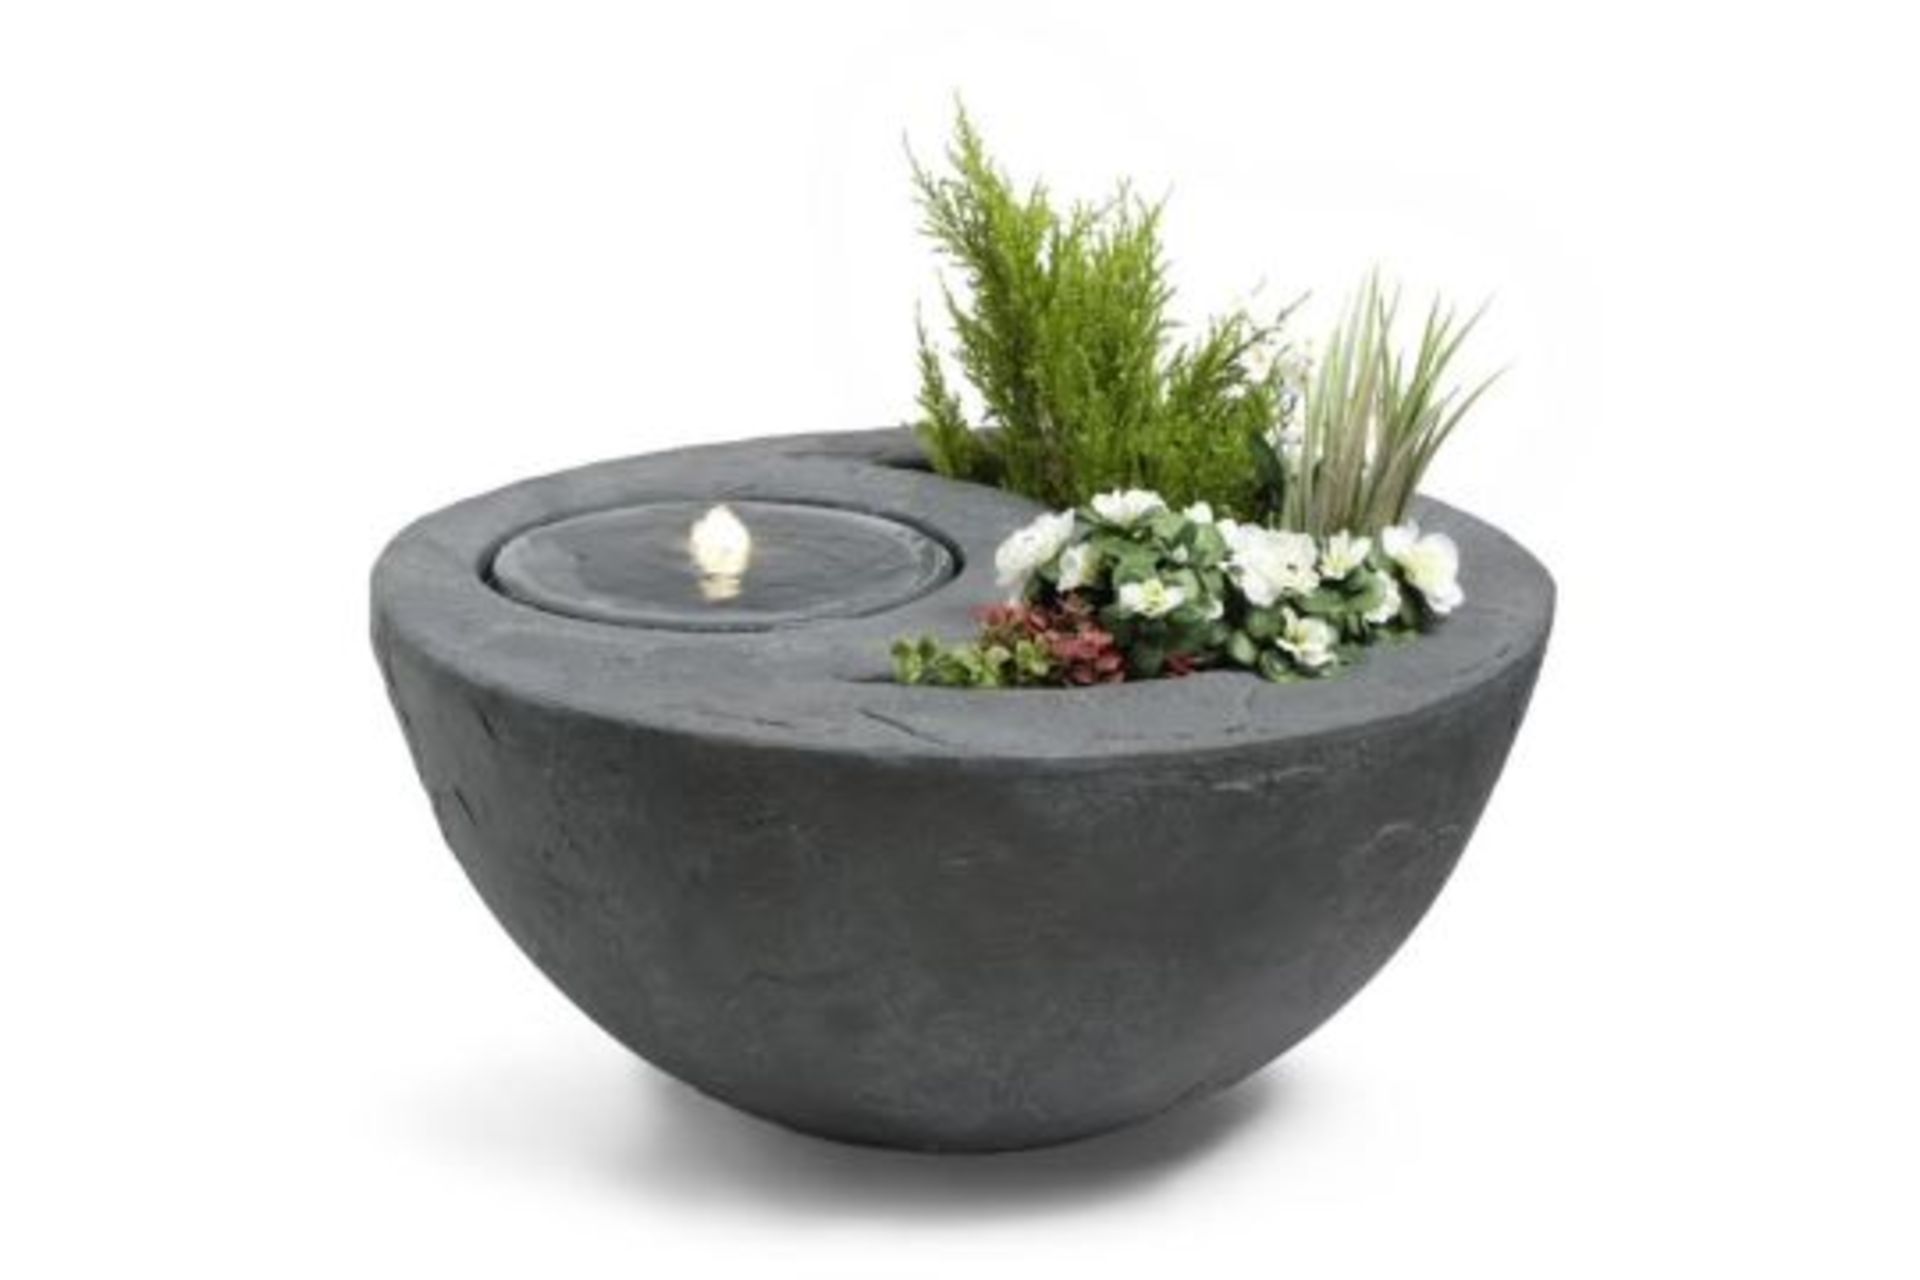 New & Boxed Dual Water Feature and Planter. RRP £299.99 (REF726) - Garden Bowl Design Planter, - Image 4 of 5